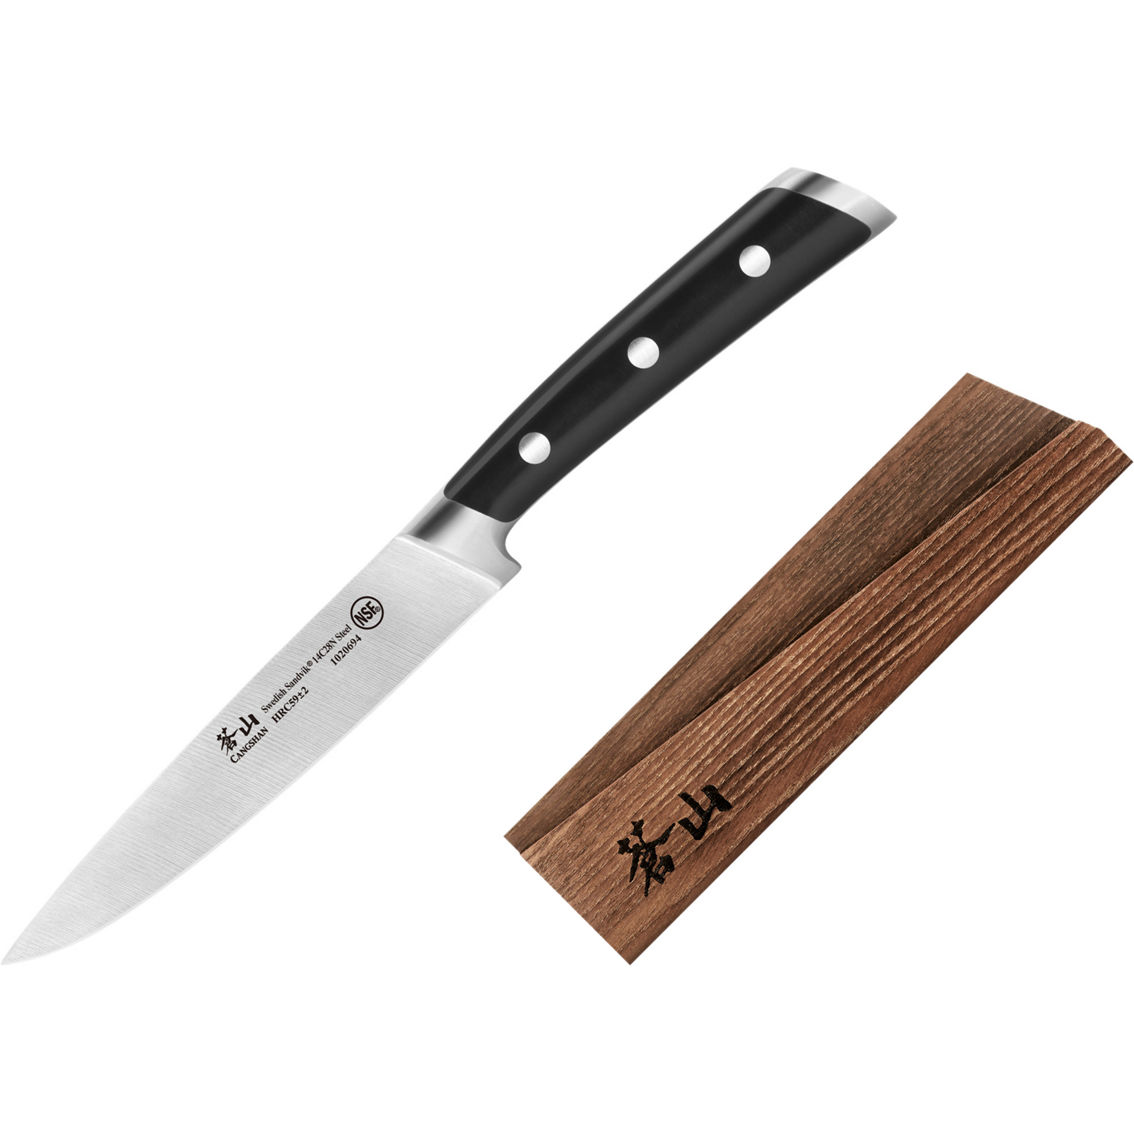 Cangshan Cutlery TS Series Forged 5 in. Utility Knife with Wood Sheath - Image 3 of 6